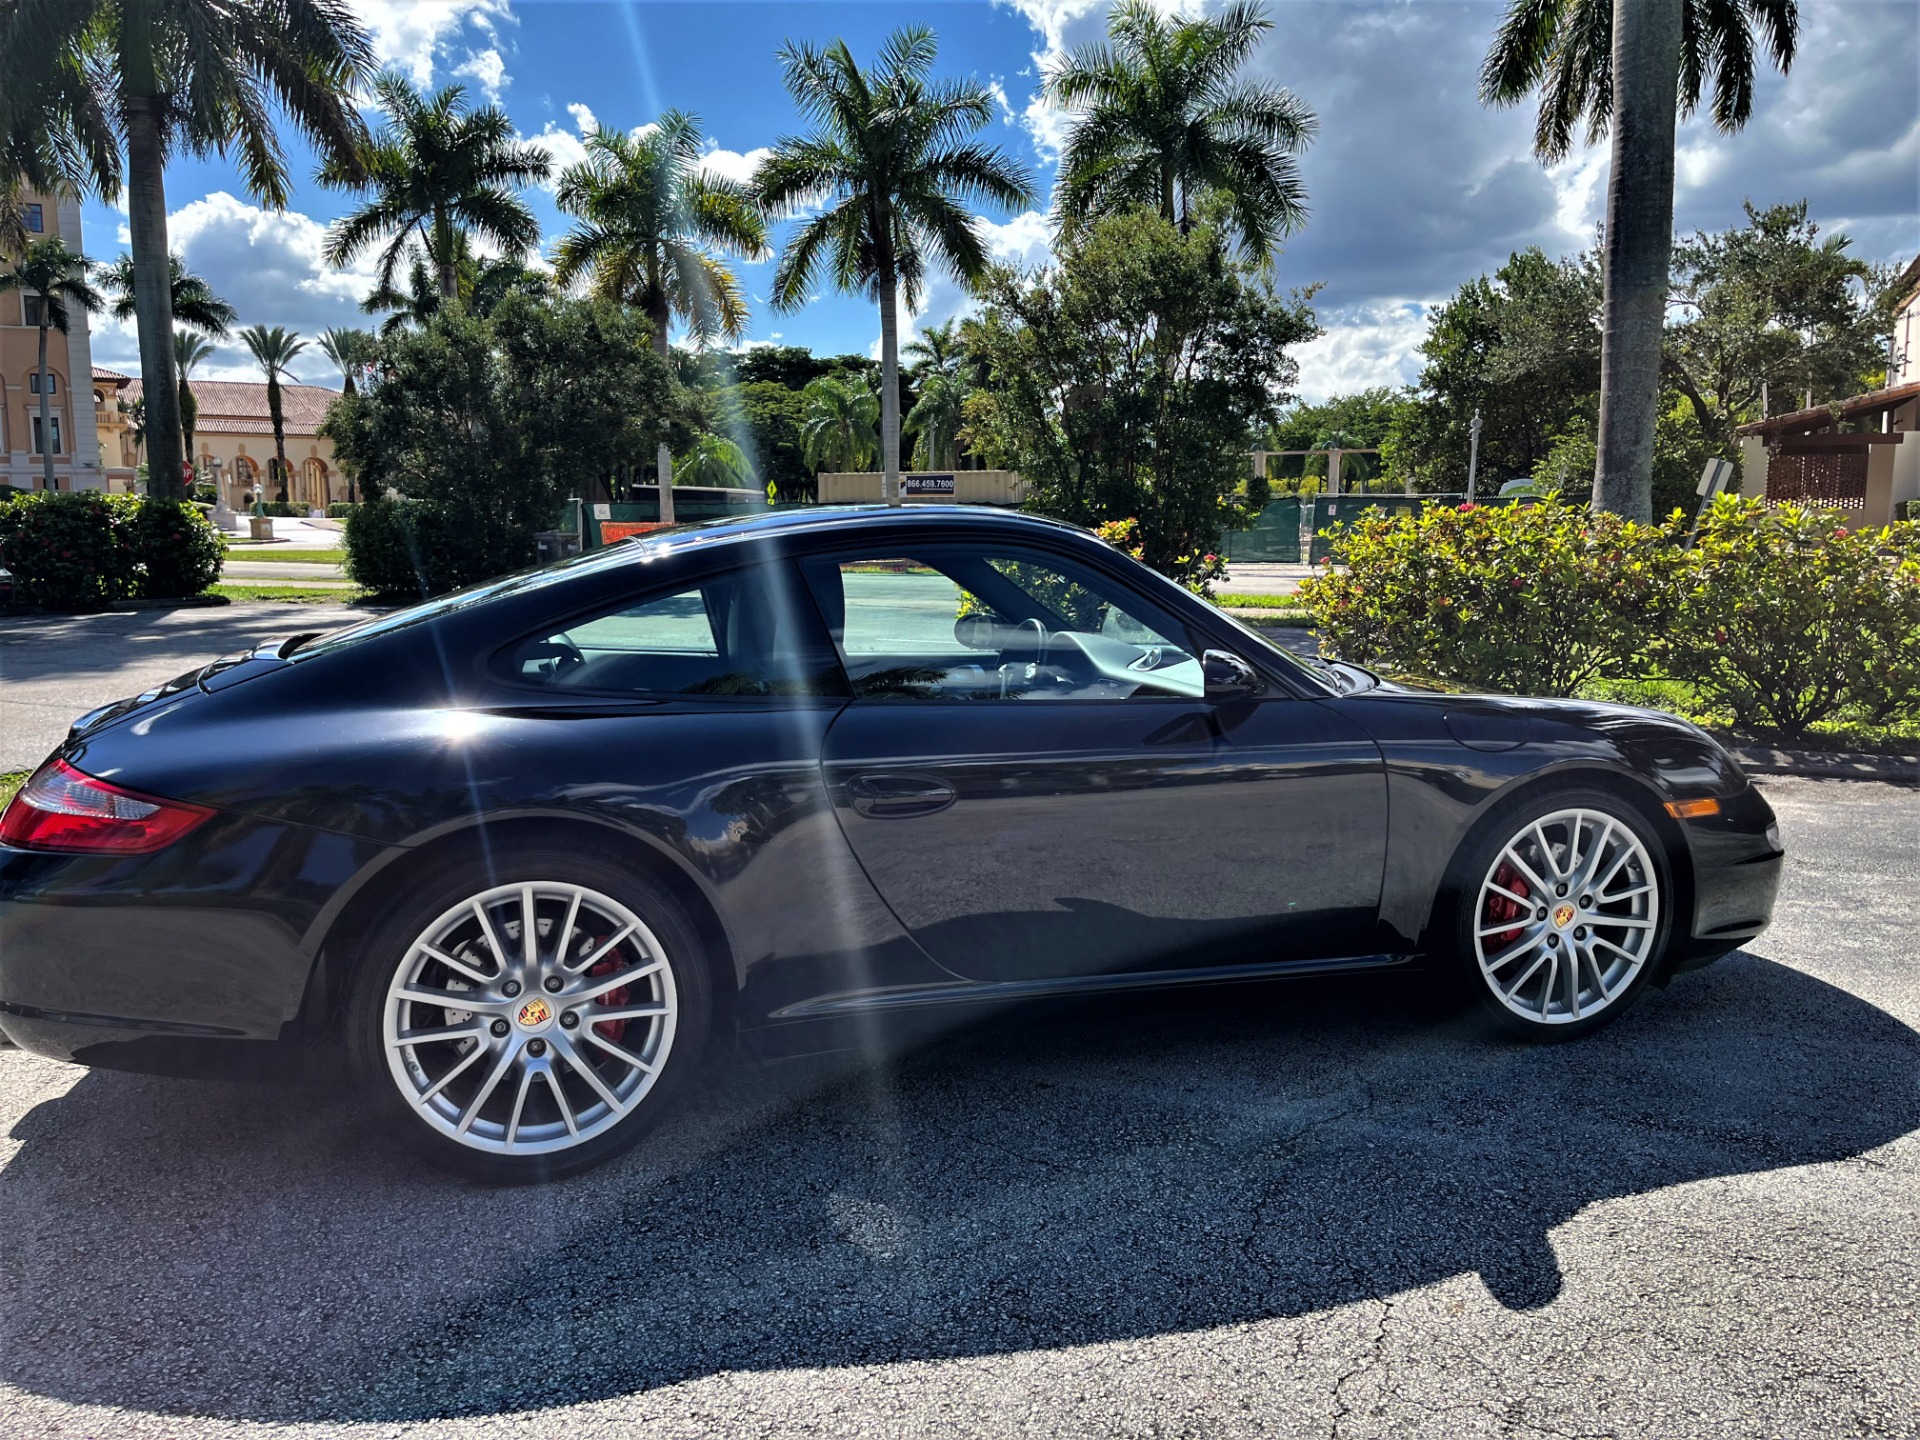 Used 2007 Porsche 911 Carrera S for sale Sold at The Gables Sports Cars in Miami FL 33146 3